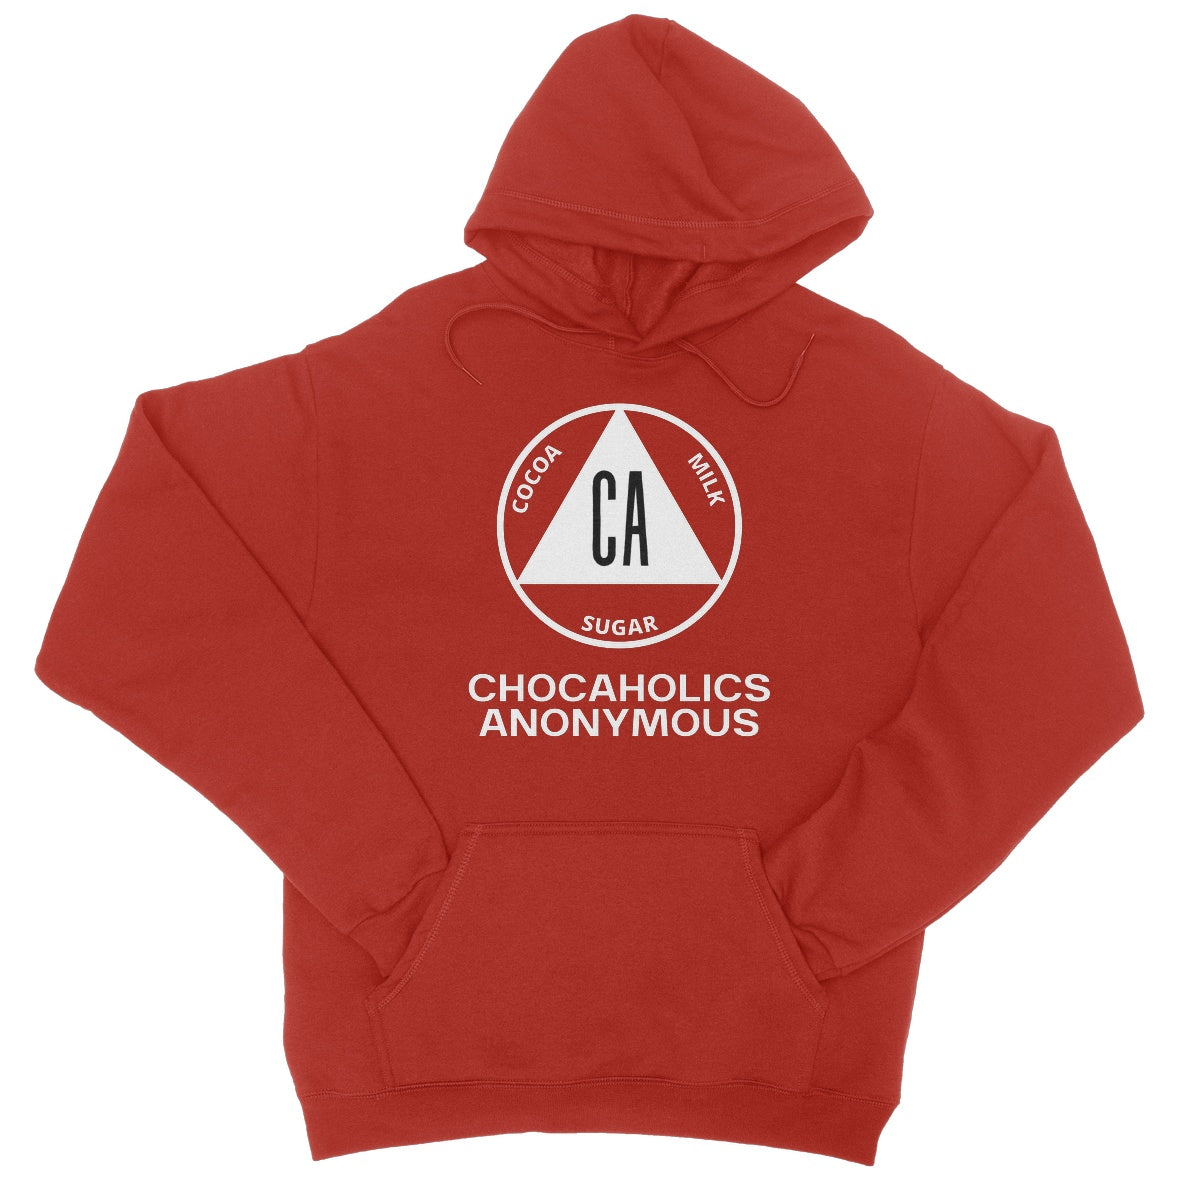 chocaholics anonymous hoodie red